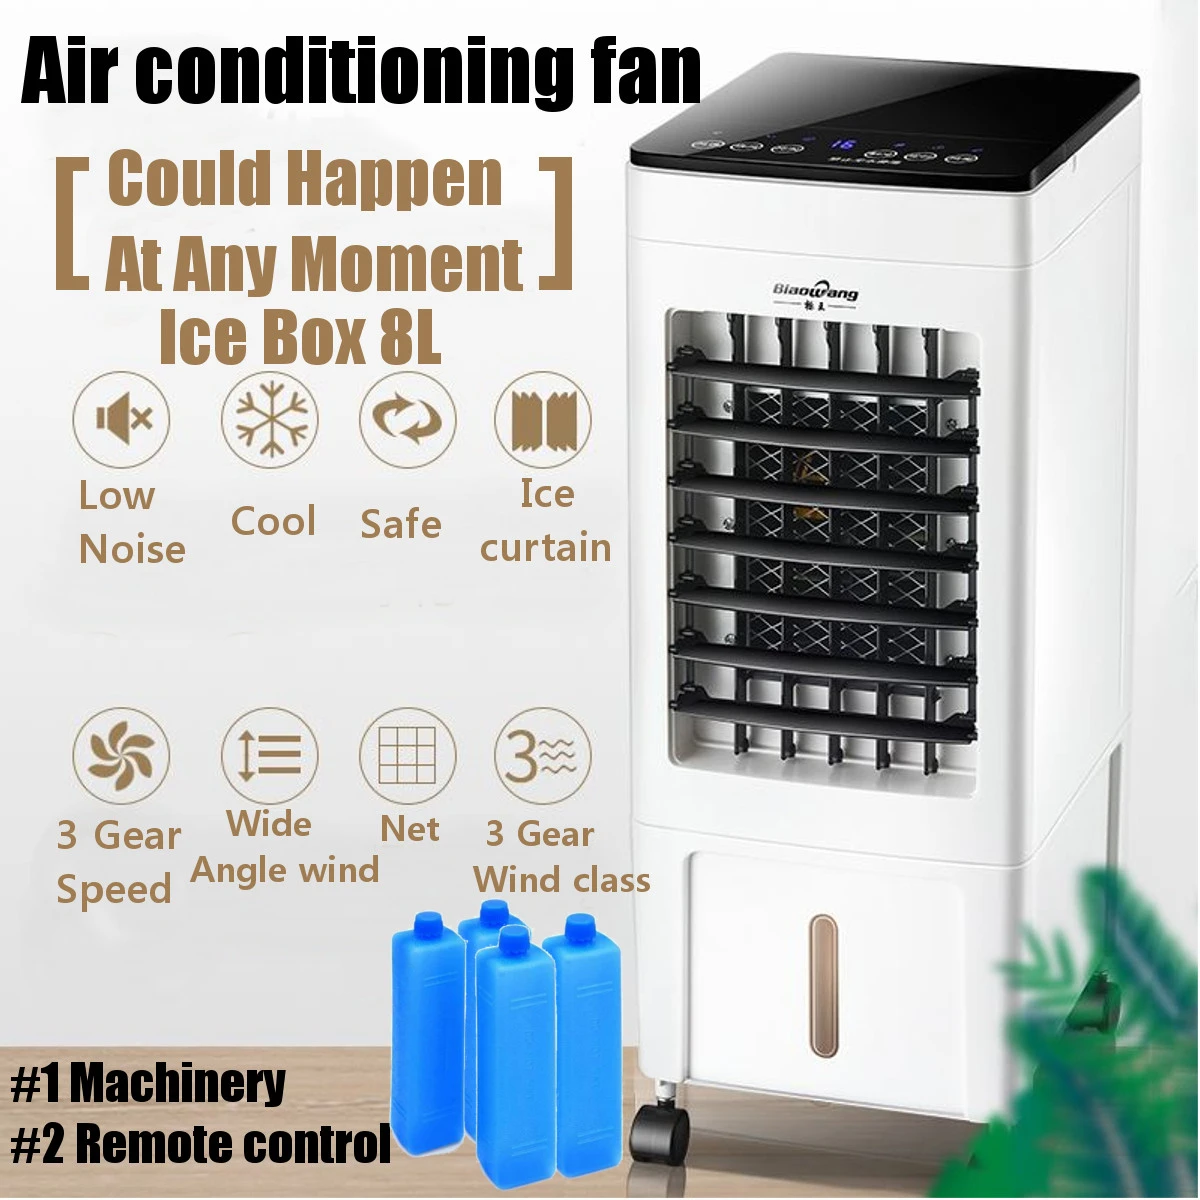 Portable Air Conditioner Conditioning Fan Humidifier Cooler System 220v Air Conditioner Cooling Fan 4 Ice Crystal Fans Aliexpress